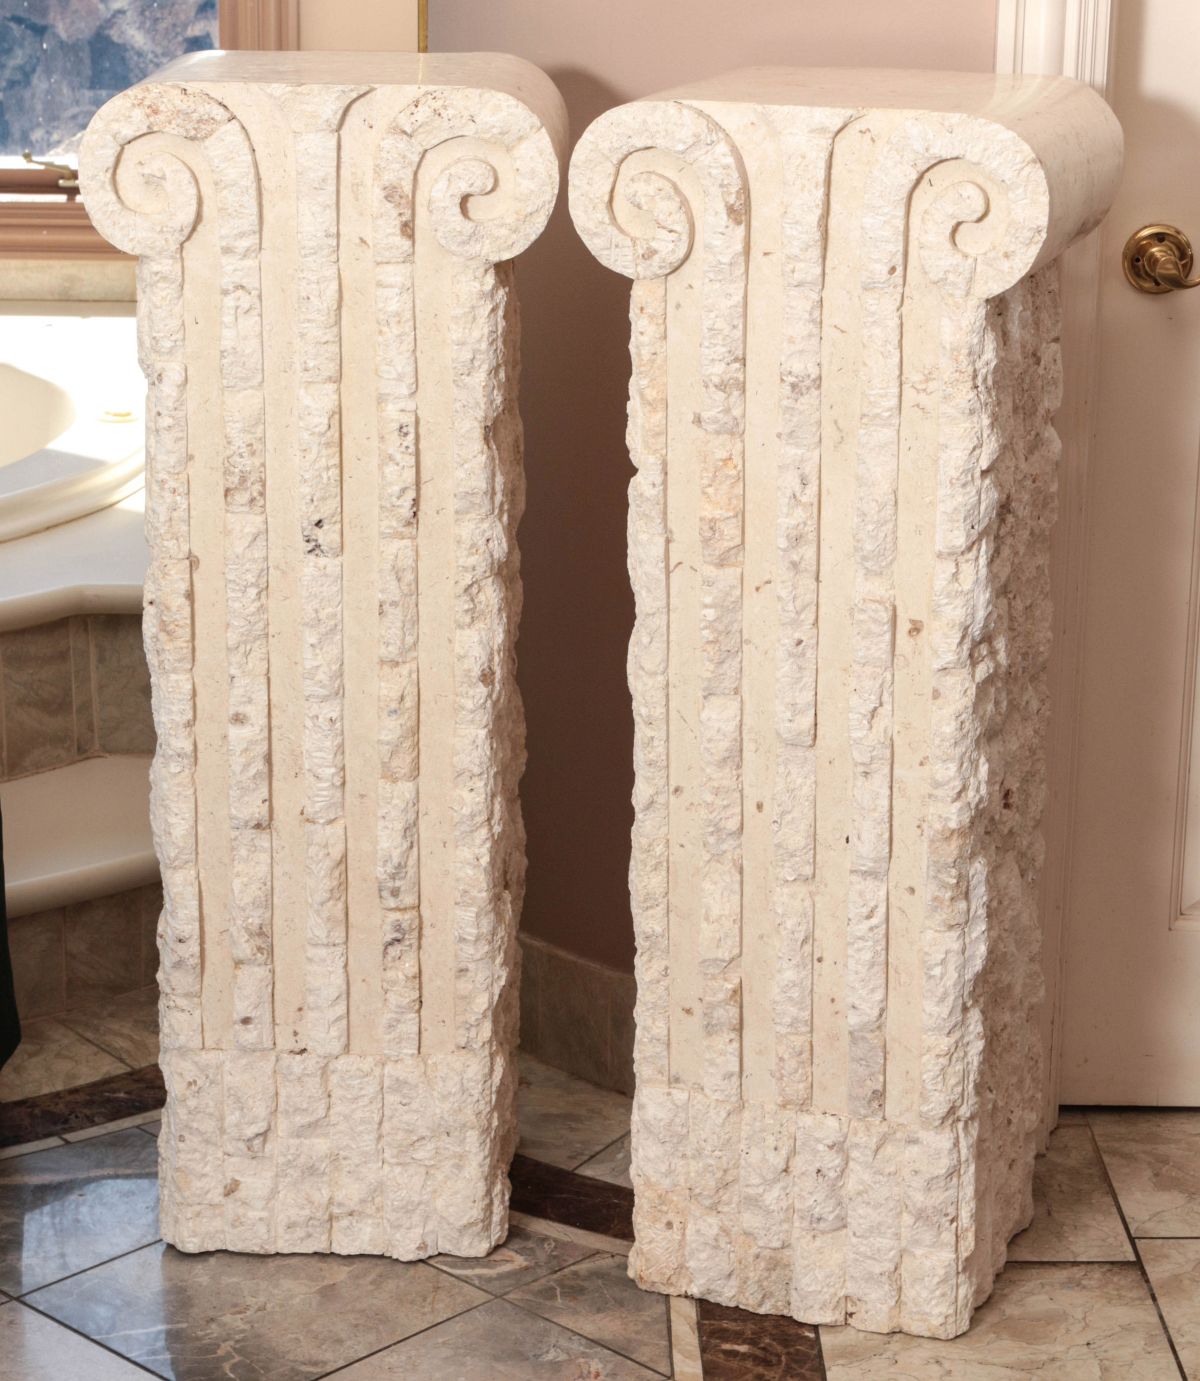 ROUGH CUT AND POLISHED FOSSIL STONE PEDESTALS